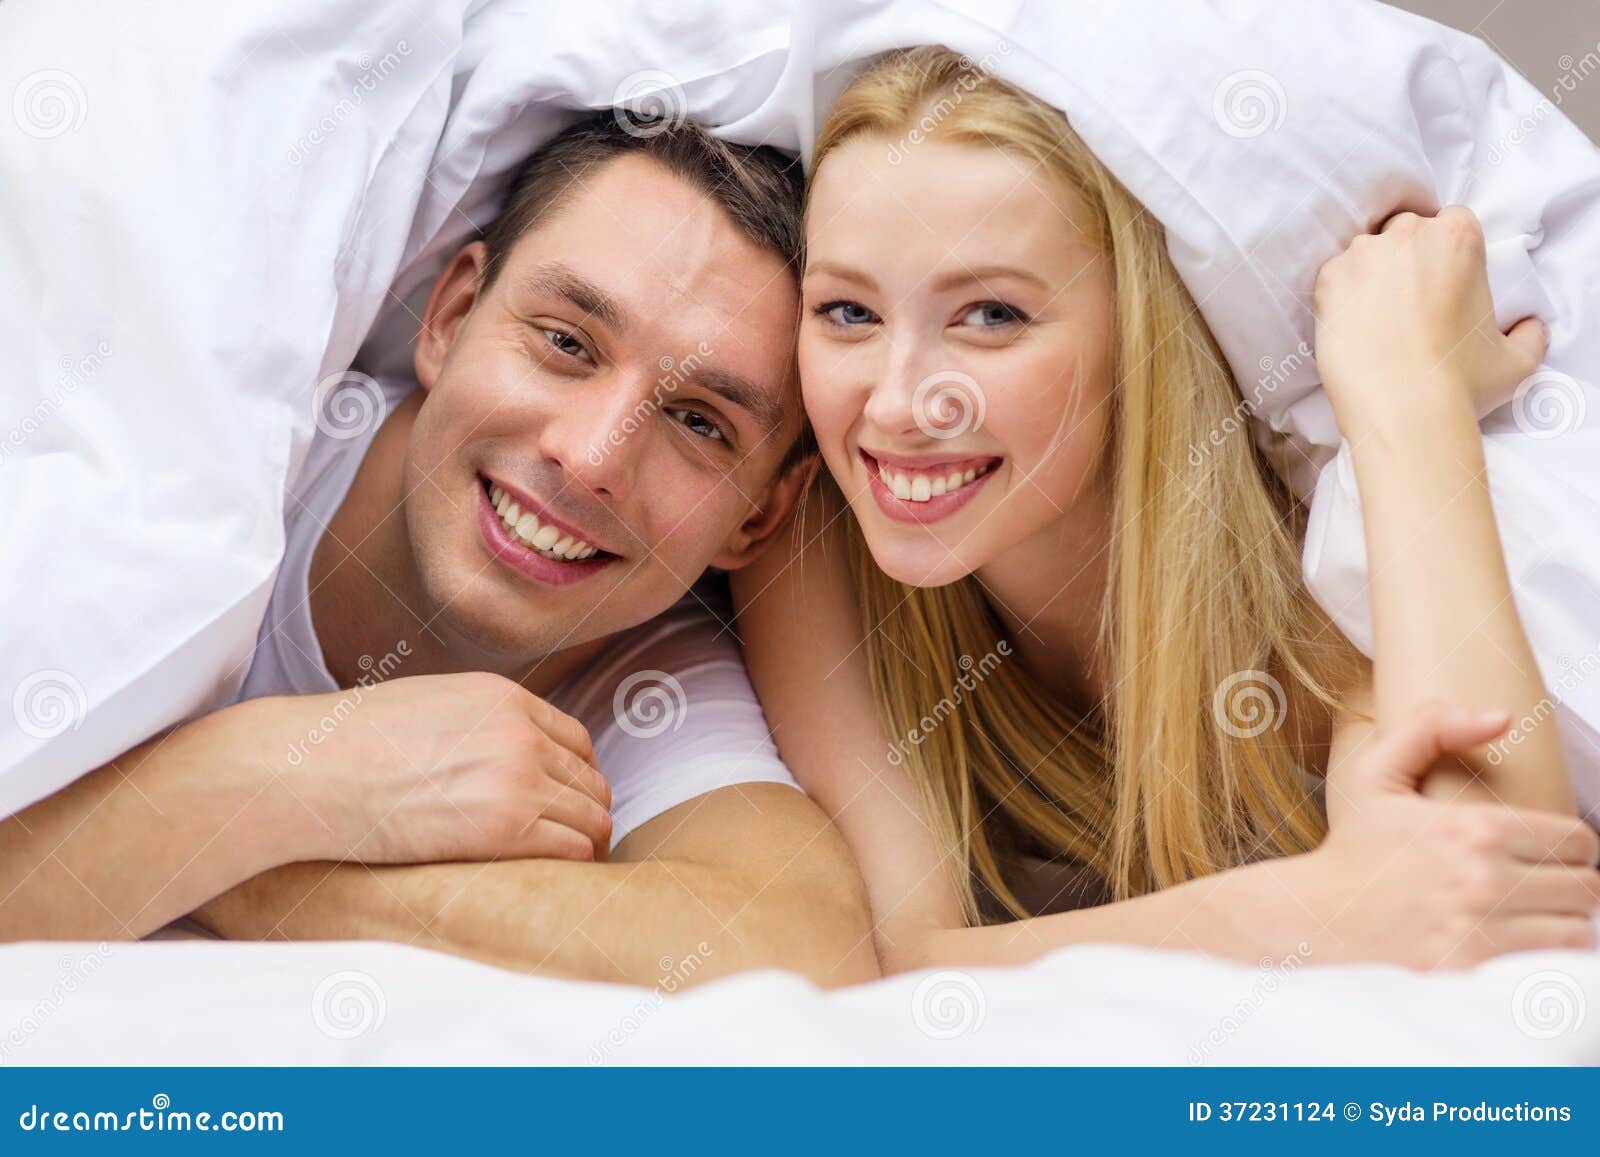 http://thumbs.dreamstime.com/z/happy-couple-sleeping-bed-hotel-travel-relationships-happiness-concept-37231124.jpg